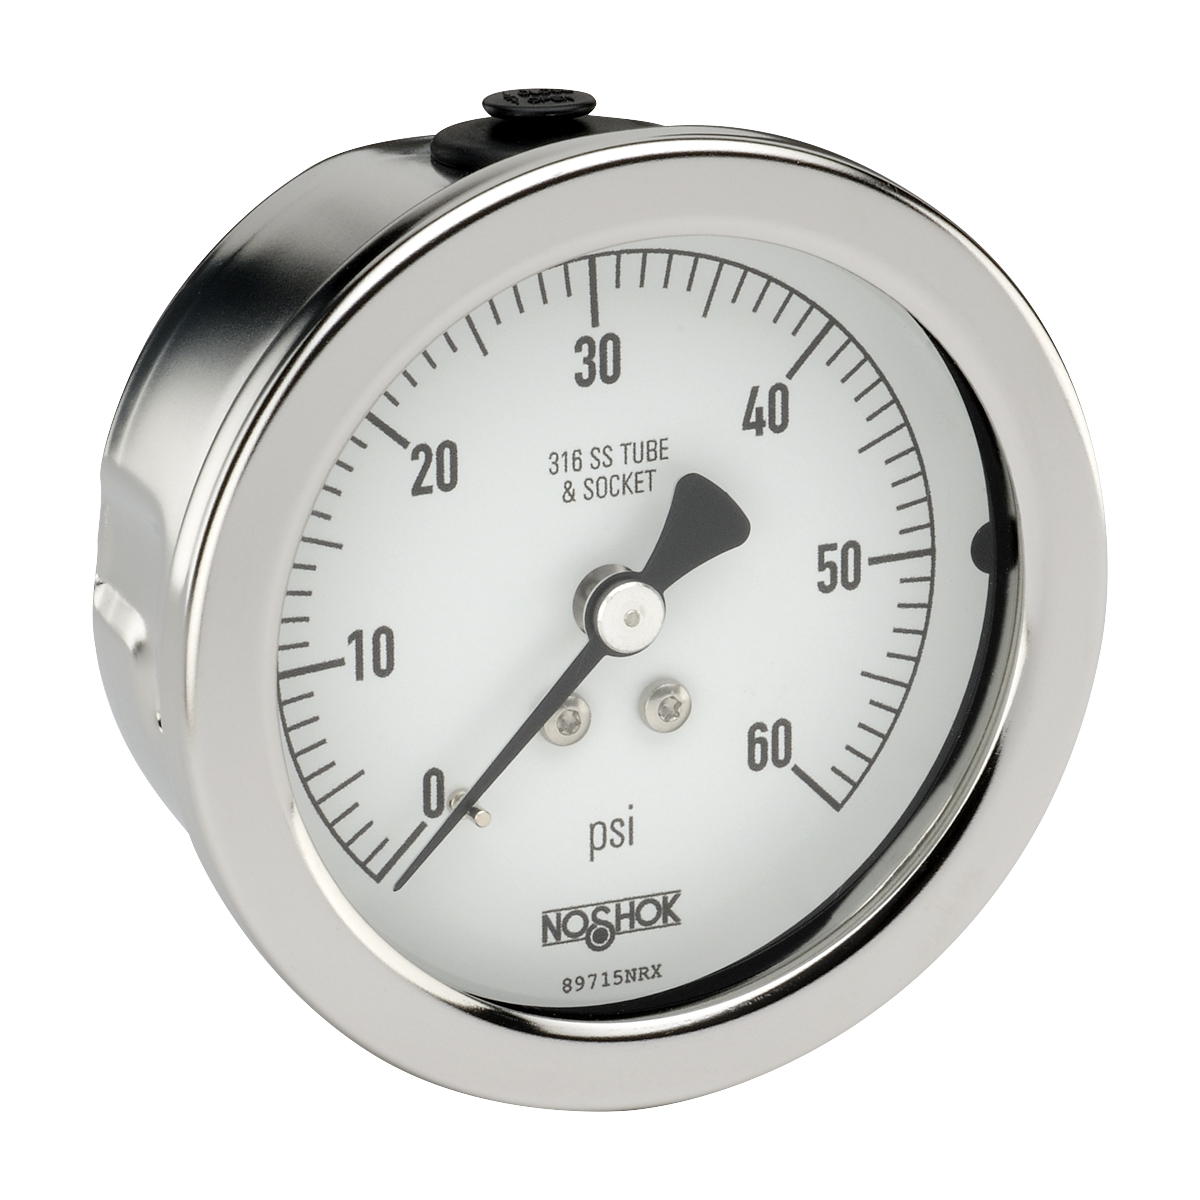 25-510-6000-psi/kPa-SPMC 400/500 Series All Stainless Steel Dry and Liquid Filled Pressure Gauges